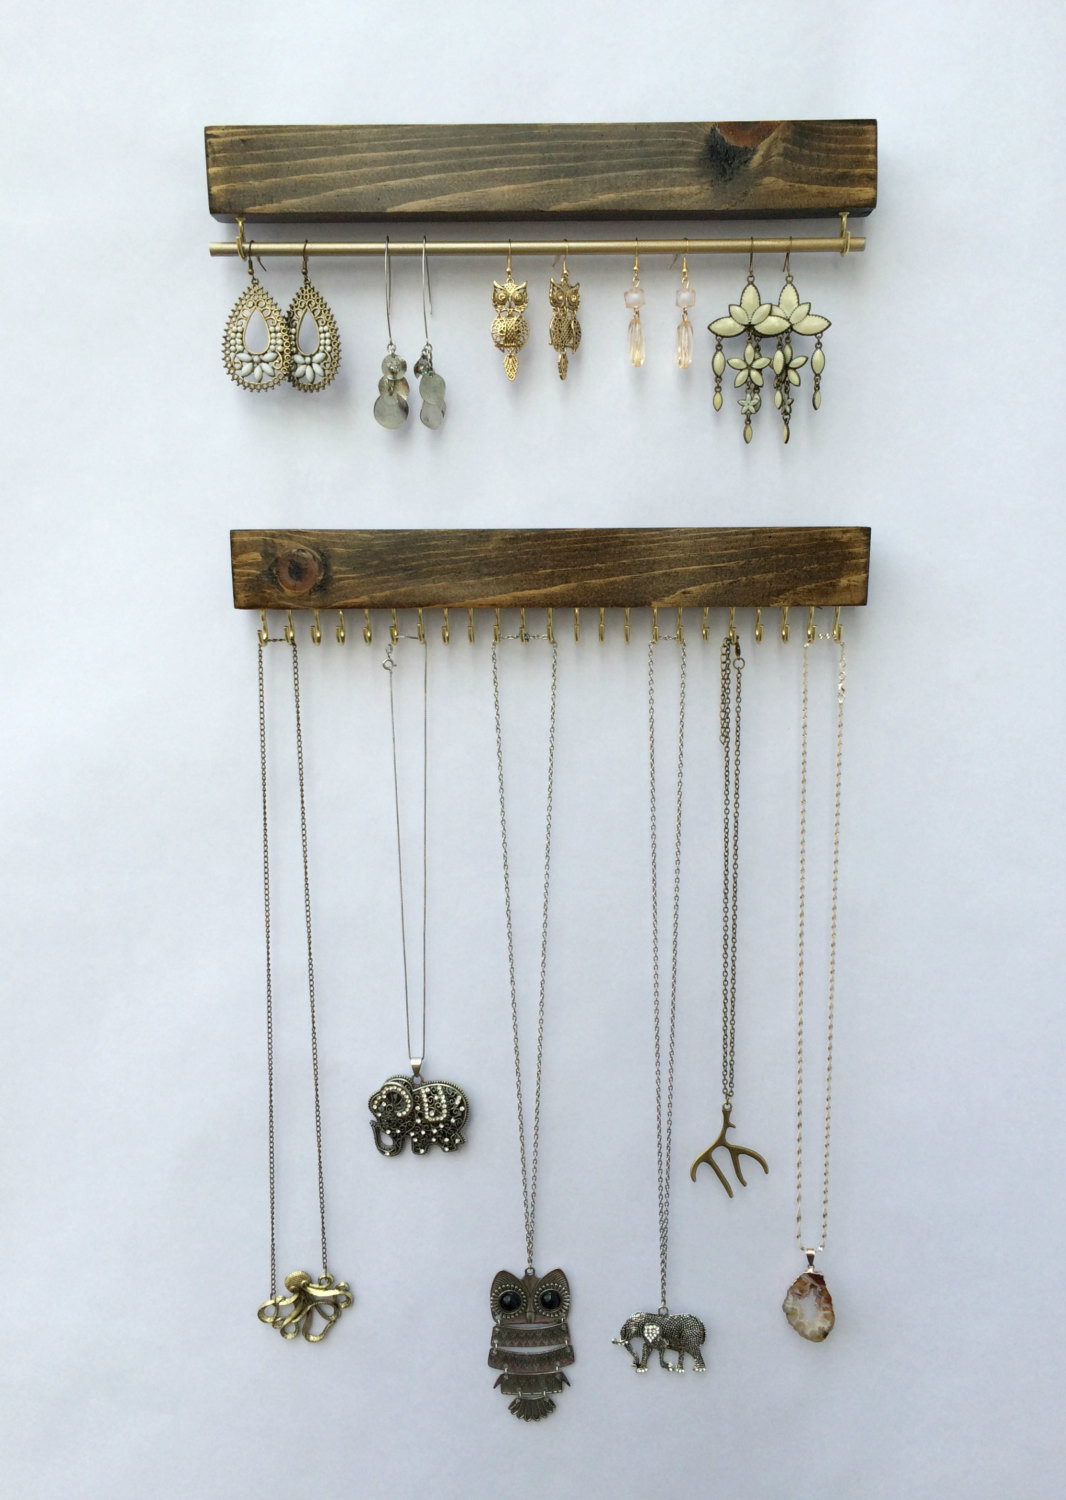 DIY Wall Mounted Jewelry Organizer
 Wall Mount Jewelry Organizer Necklace Holder and Earring